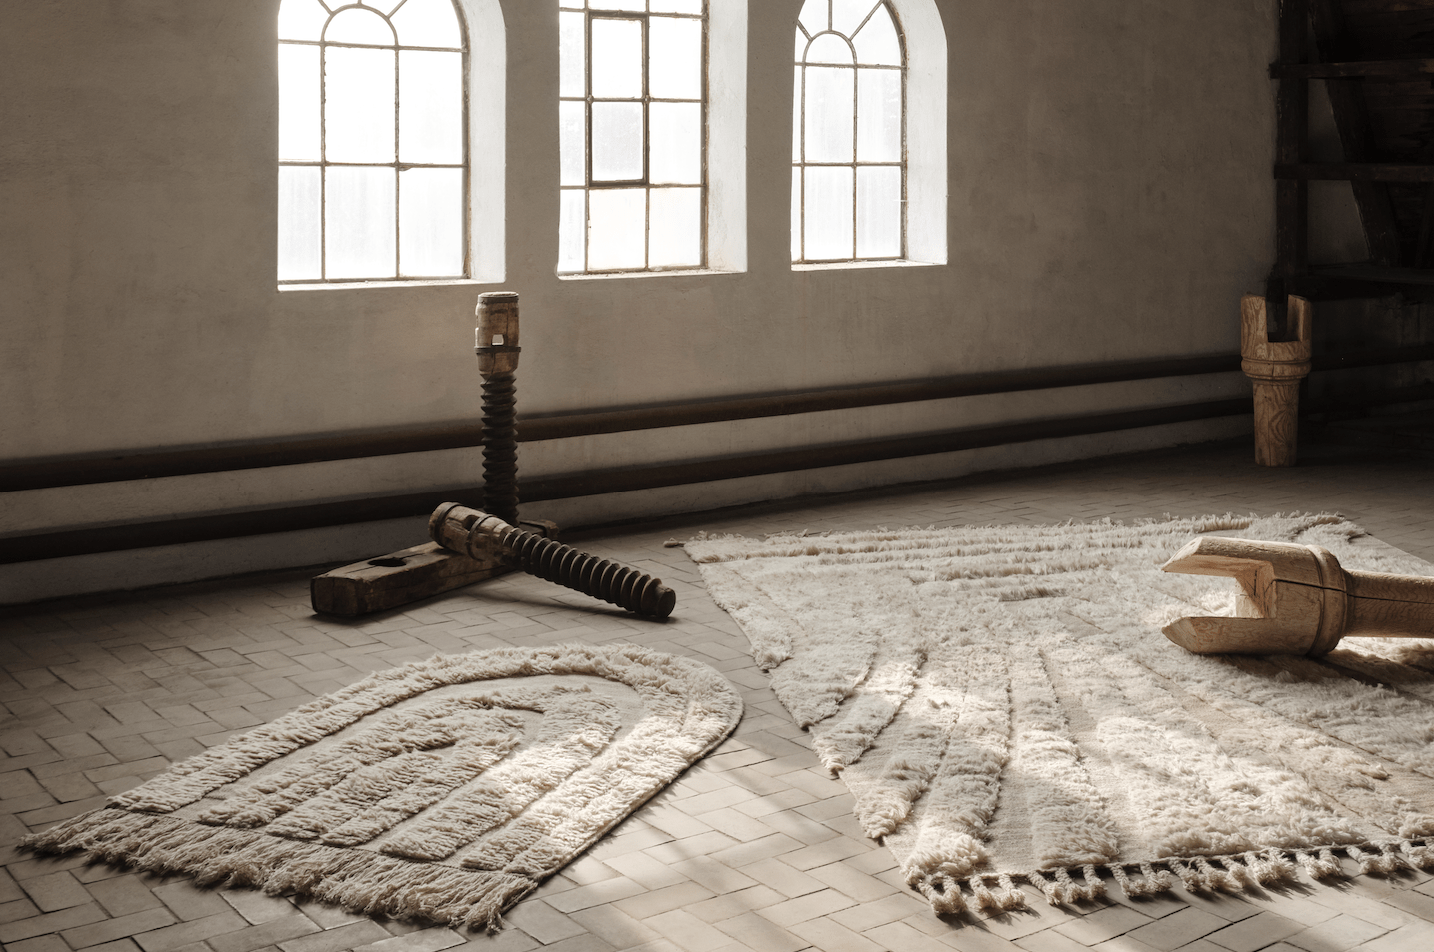 Enter The Loft - a neutral coloured room with rugs and objects in it.